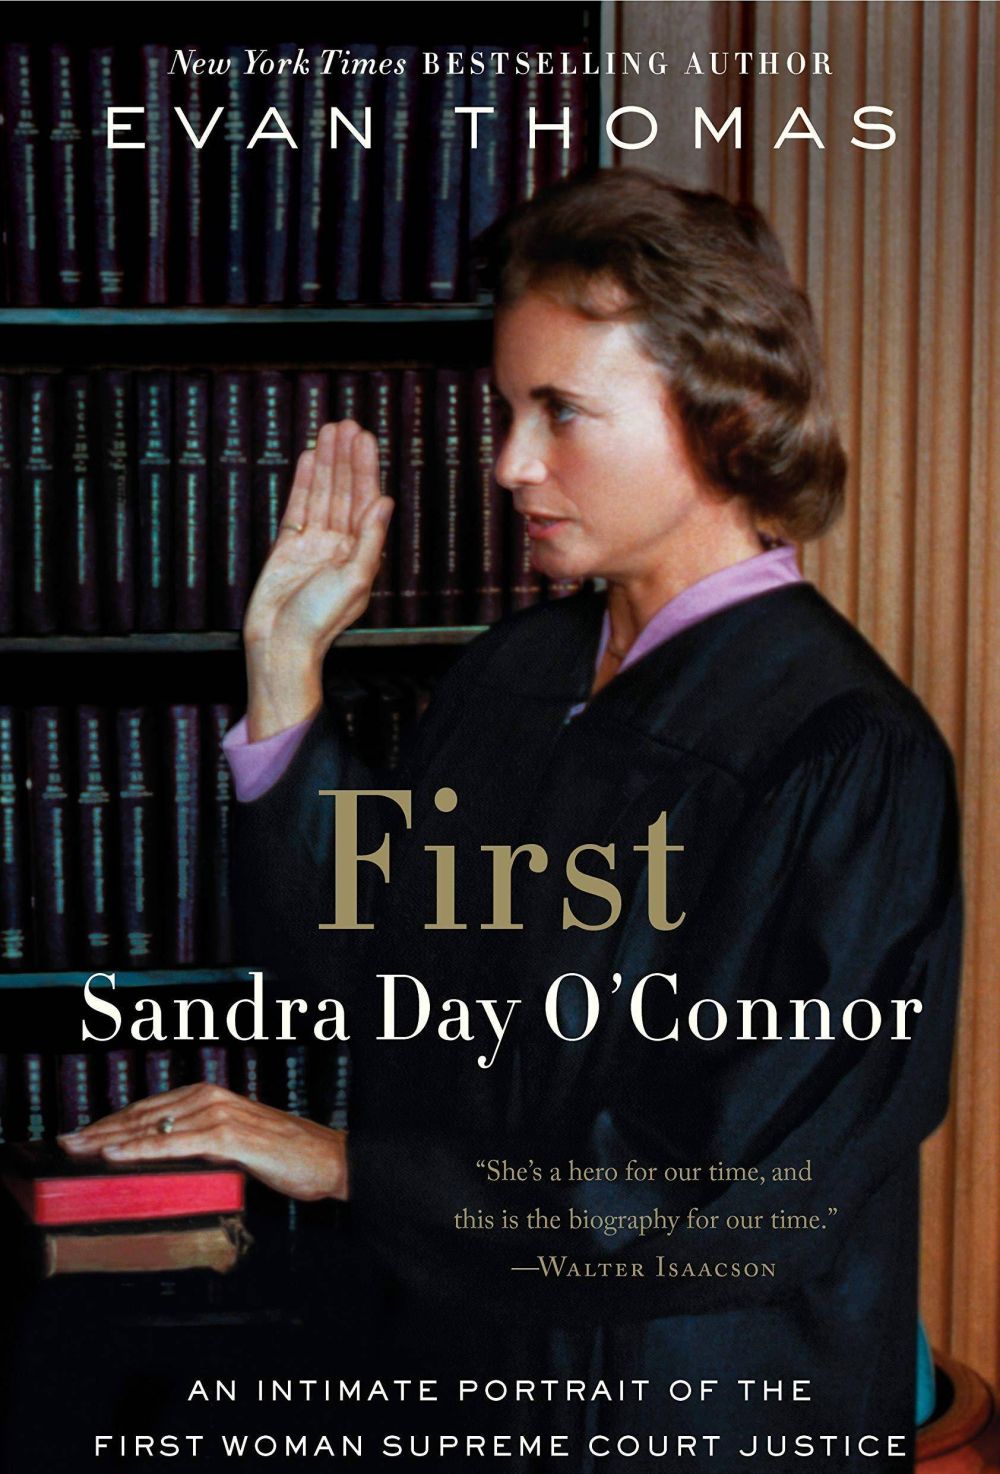 Sandra Day O'Connor Sexy and Hottest Photos , Latest Pics